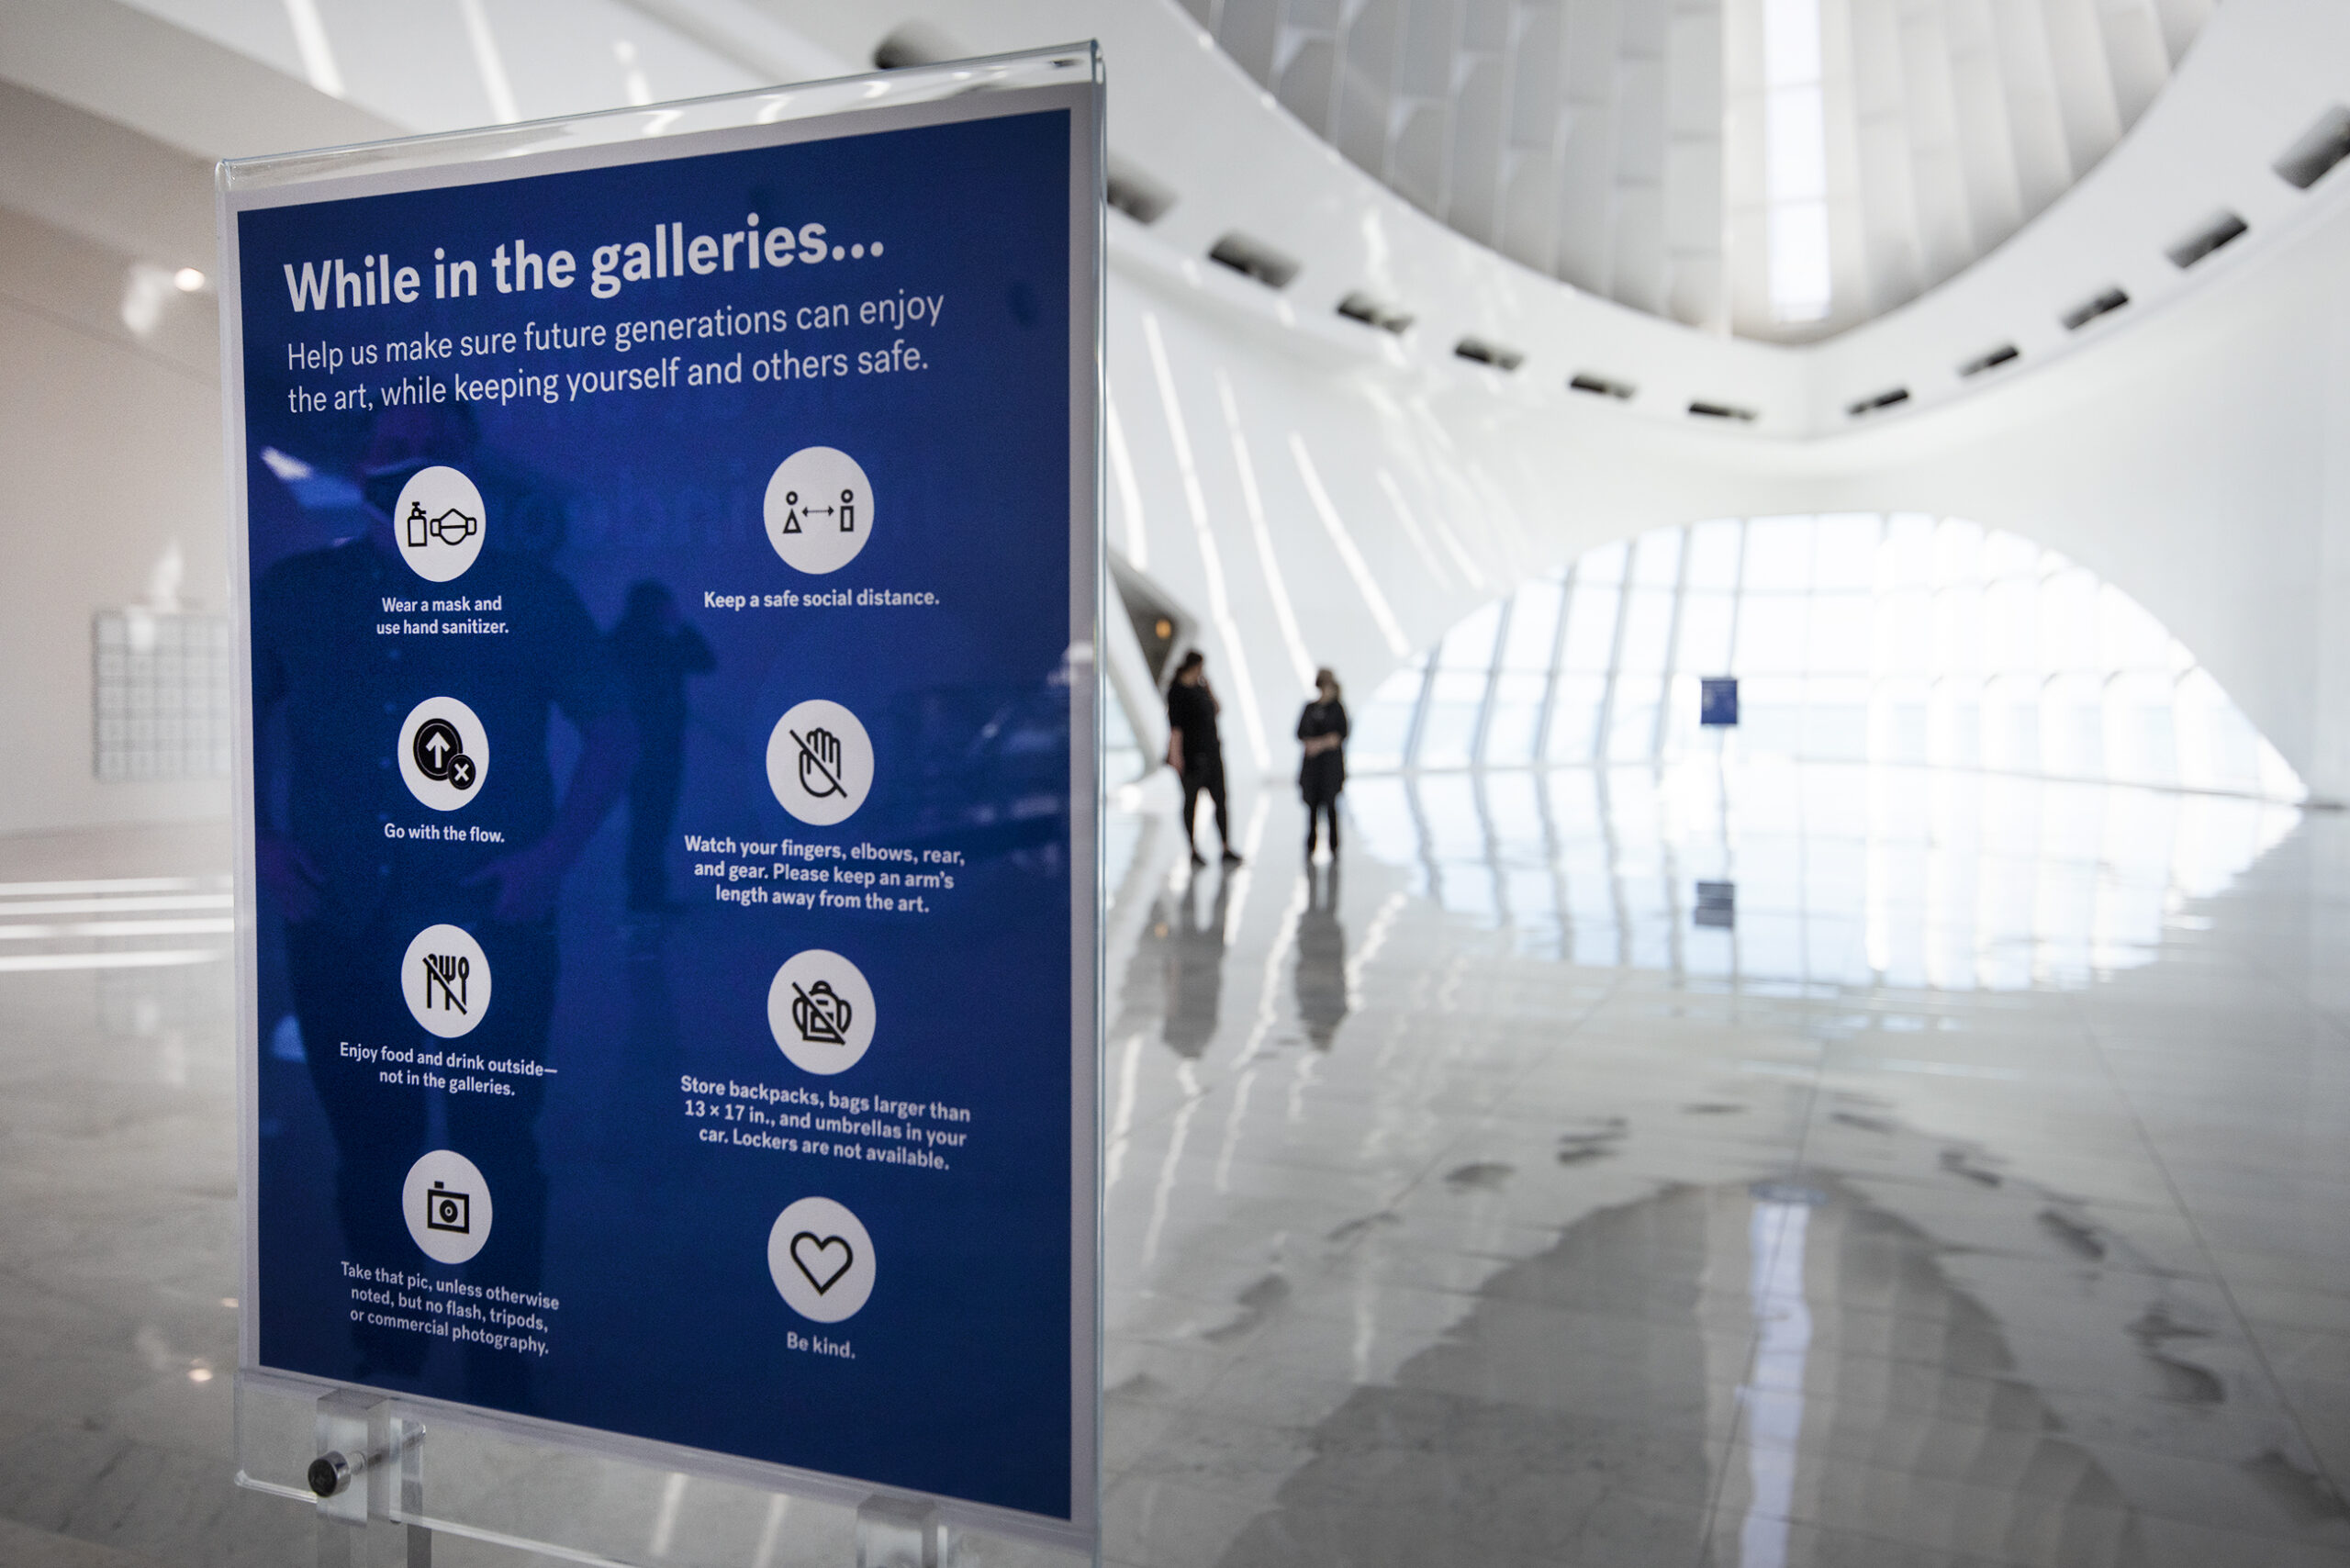 A blue sign is seen in the front of the museum begins with "While in the galleries..." and then explains COVID-19 safety rules.